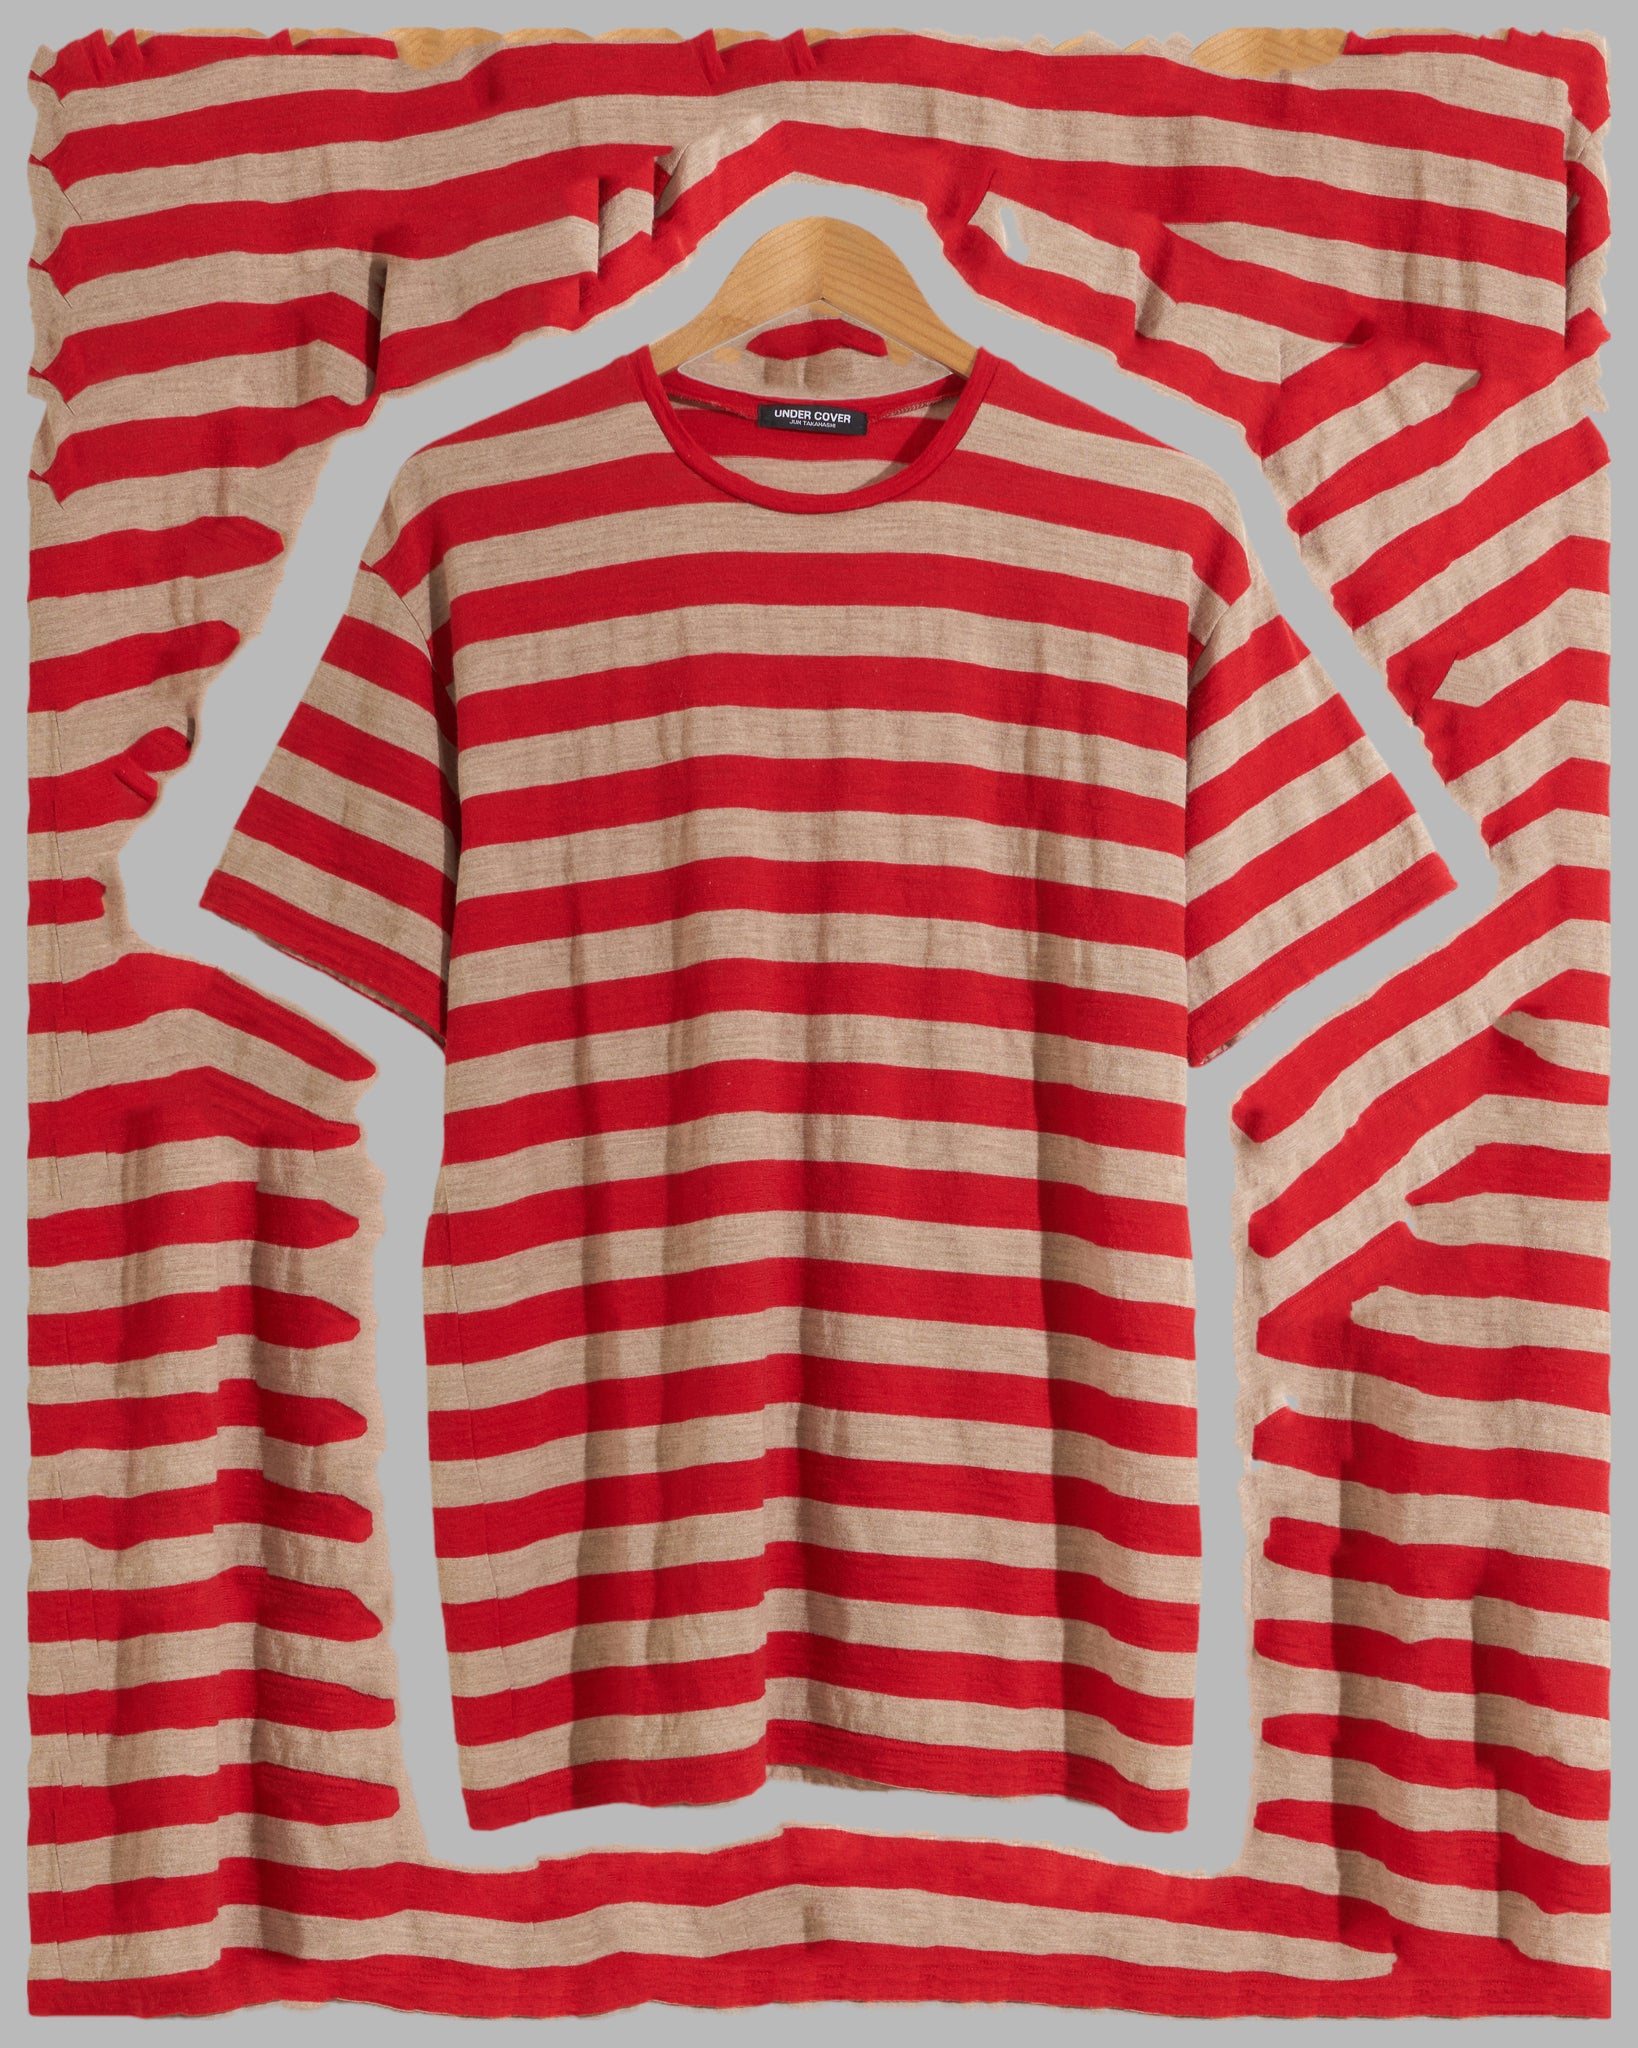 Undercover AW1997 red beige wool jersey horizontal stripe t-shirt - S